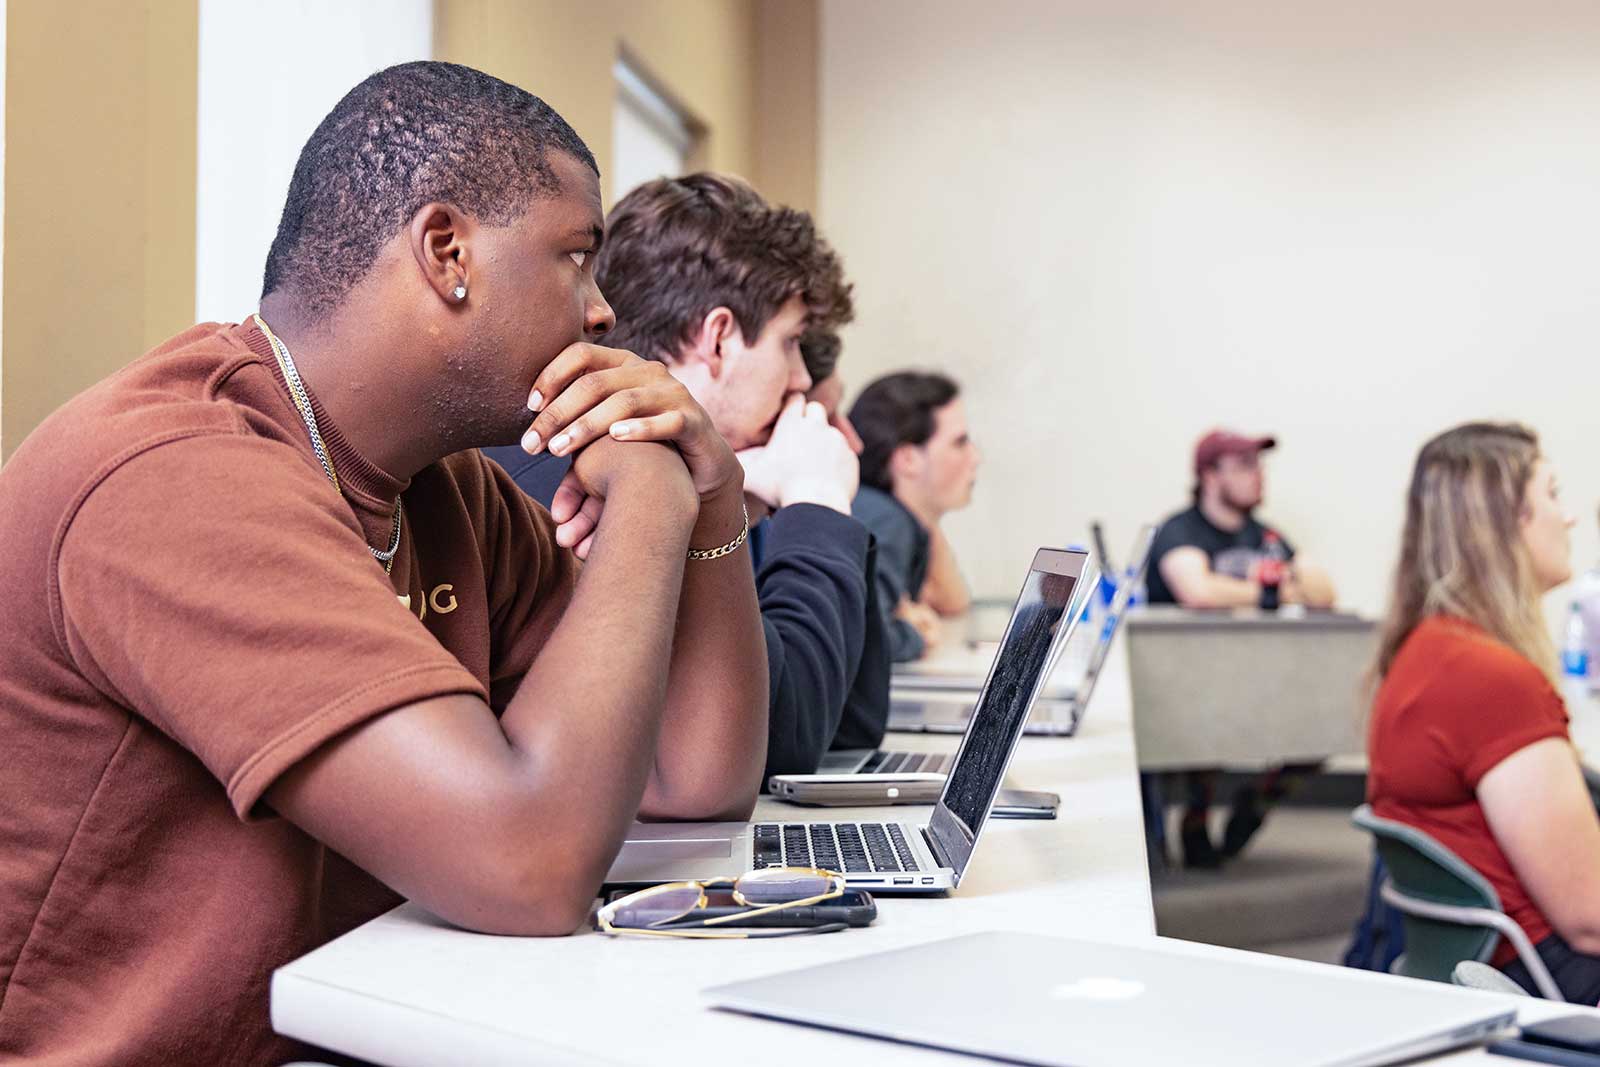 The Cybersecurity Degree Program at FHU equips students with the essential skills to thrive in the ever-evolving landscape of cybersecurity and protect digital assets from potential threats.